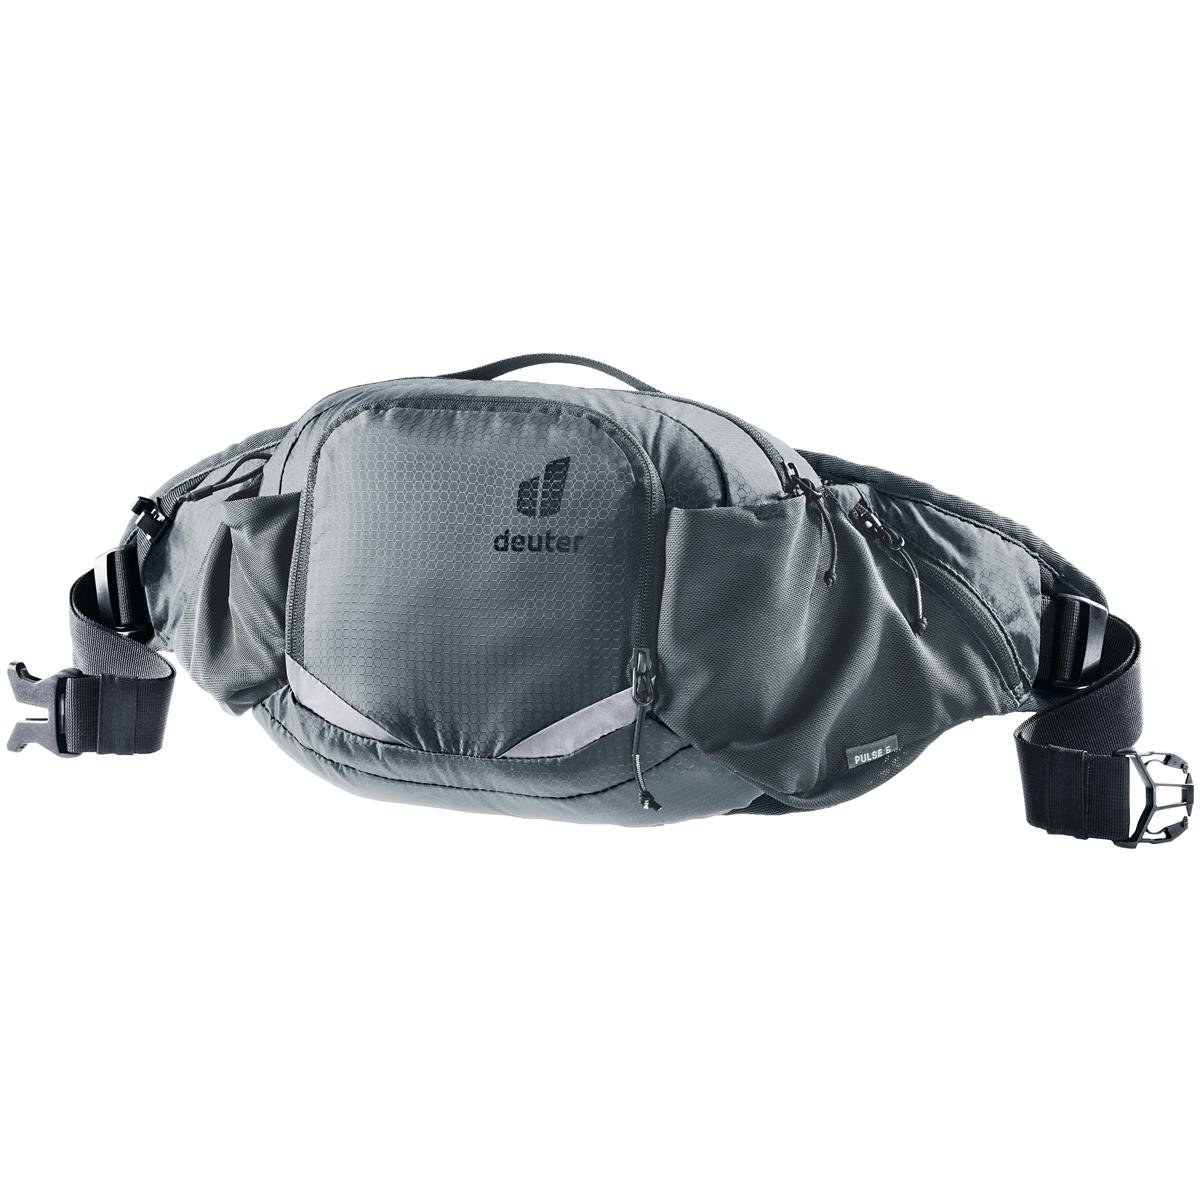 Deuter Hip Pack with Hydration System Compartment Pulse 5 Graphite